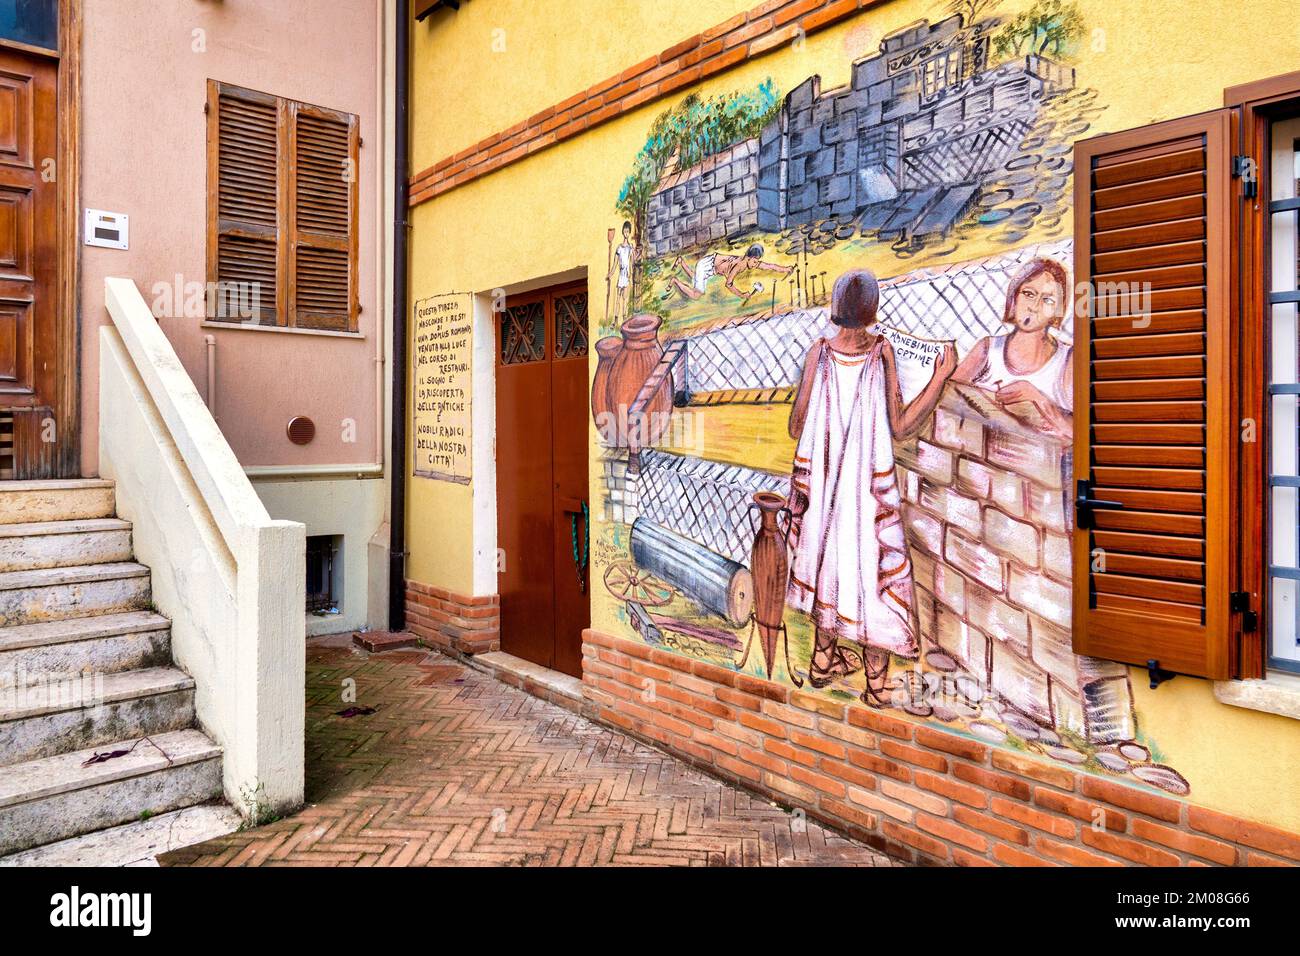 Murals by the artist Mira Cancelli on the history of the village of Cepagatti, Italy Stock Photo